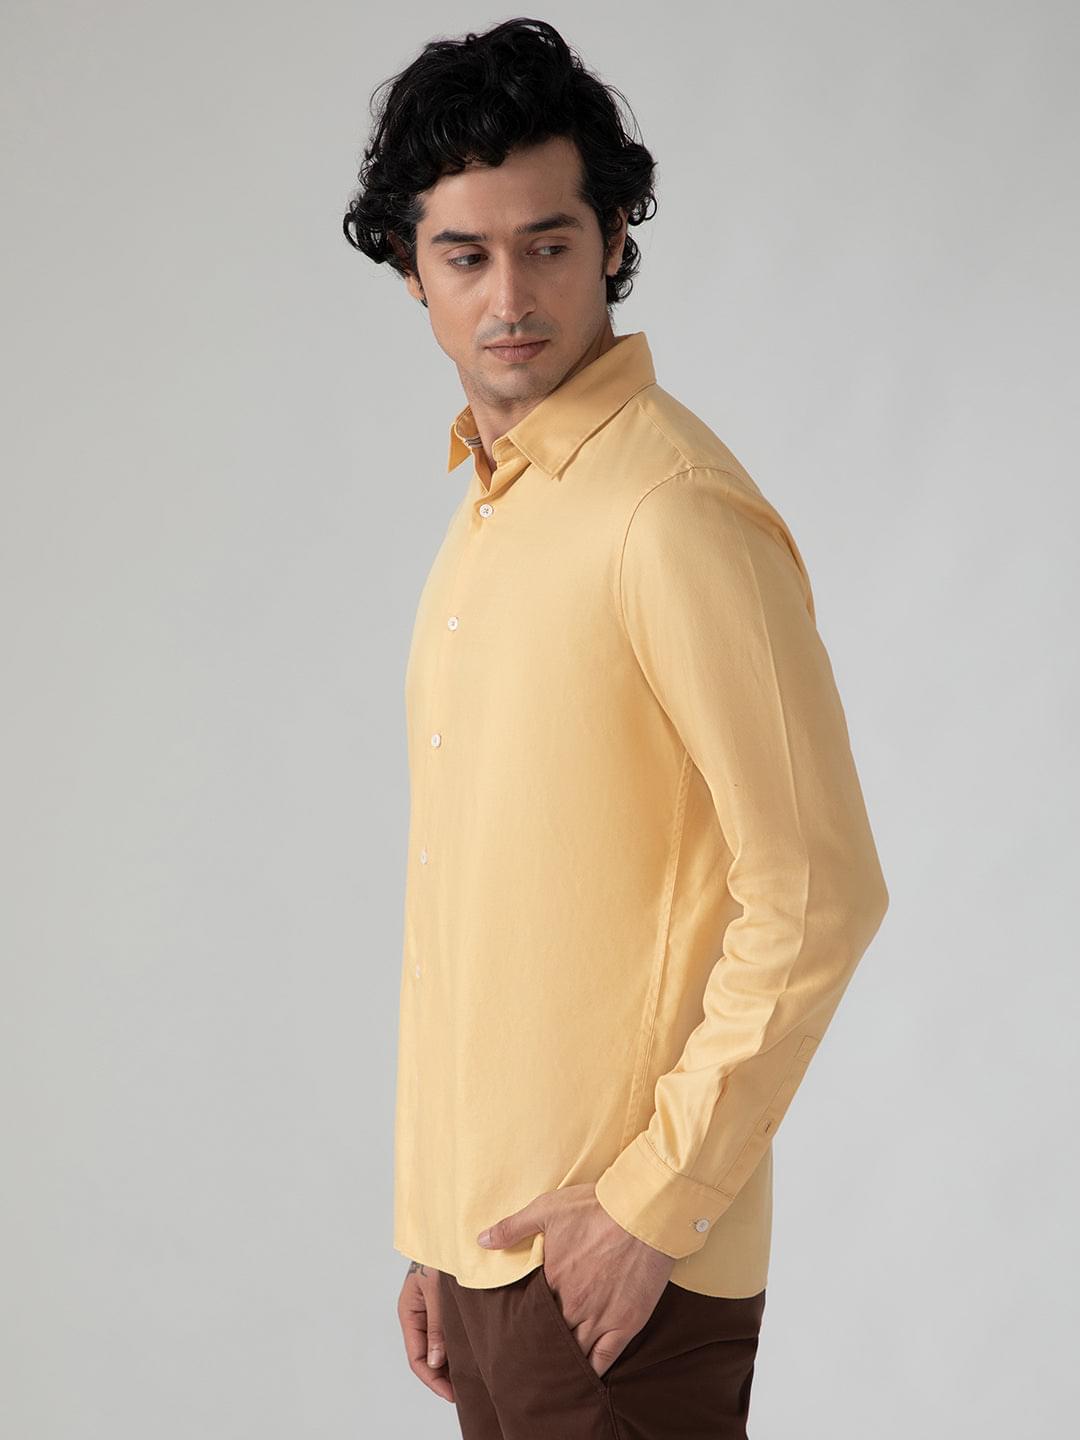 Cotton Tencel Shirt in Tuscany Yellow- Comfort Fit